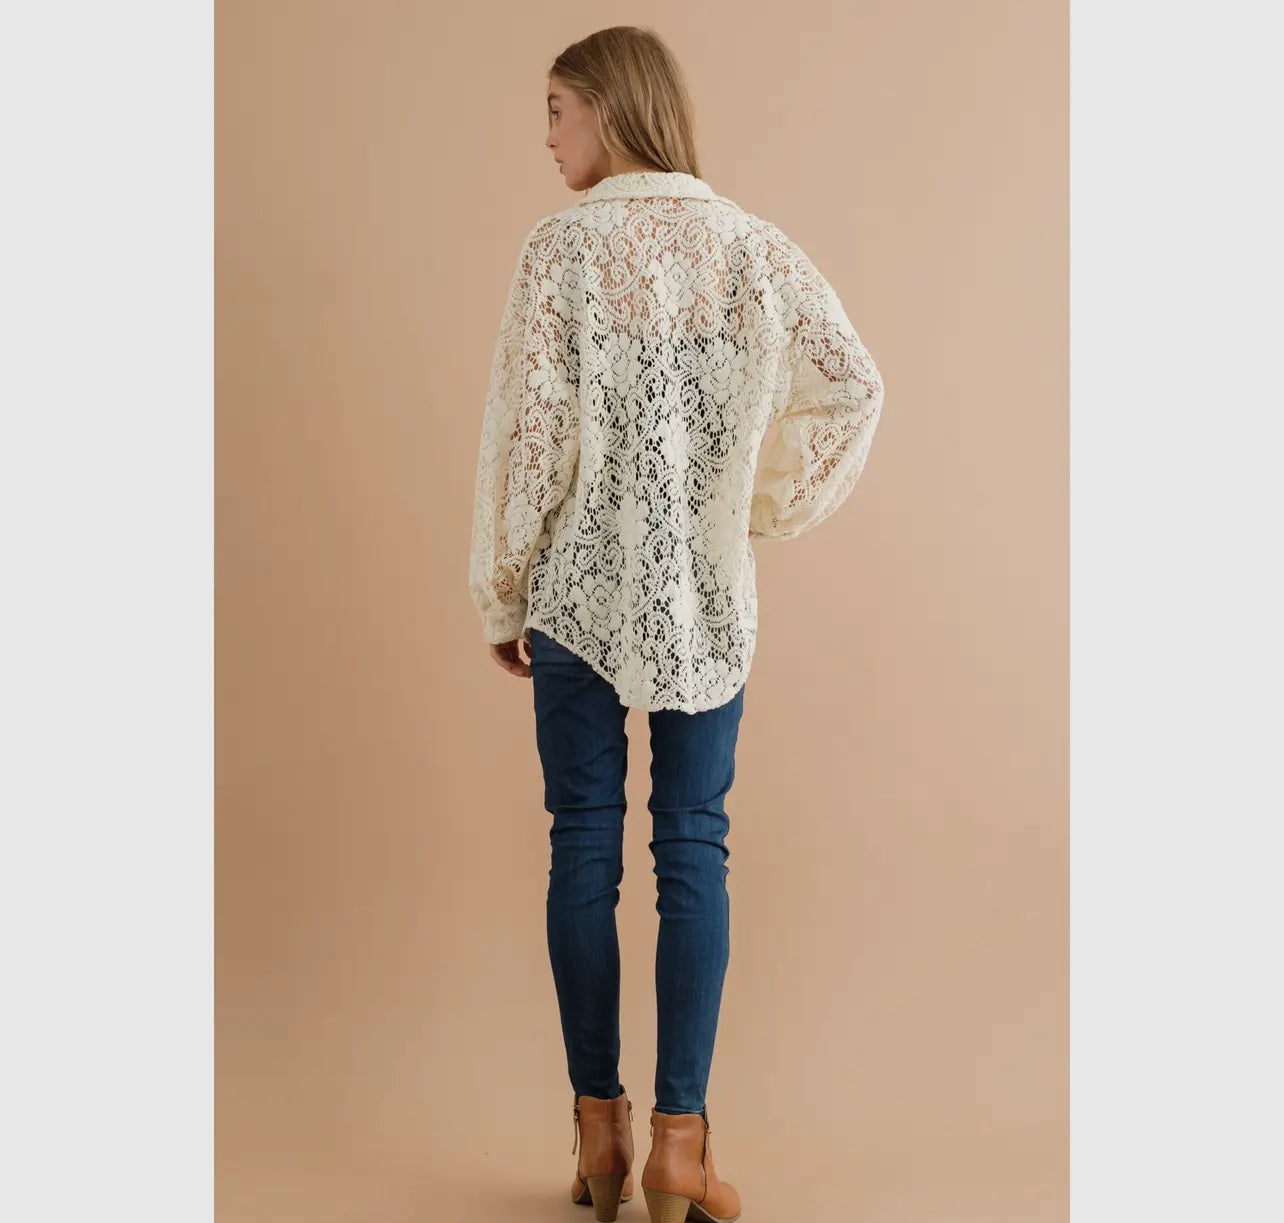 “With Love,” Lace Button Down